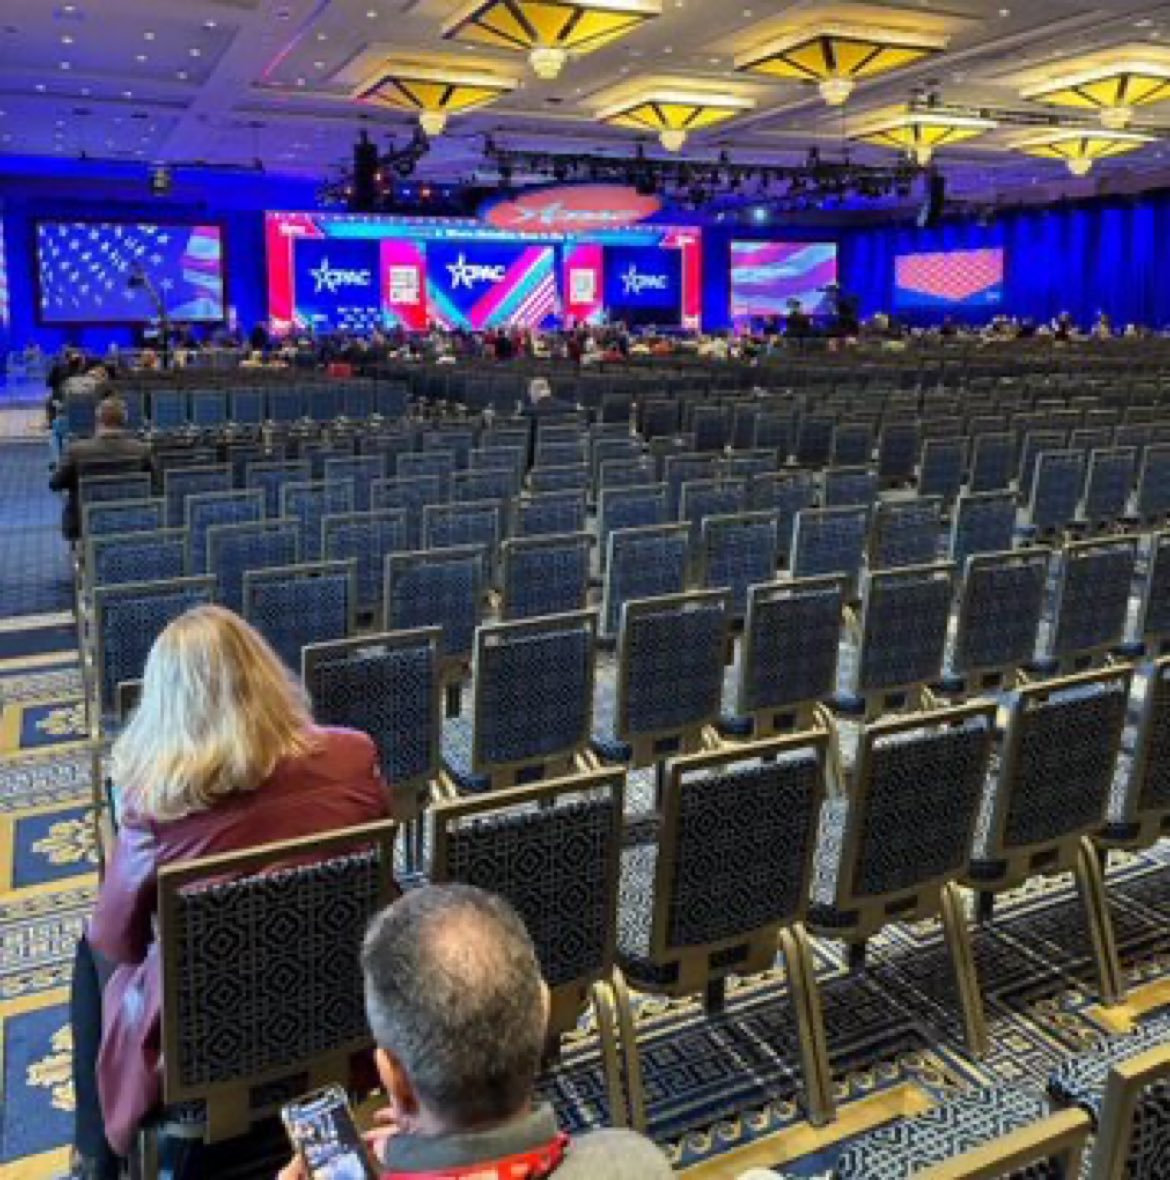 Live from CPAC. 😂 You know they would HATE it if we all retweeted this to show how pathetic the attendance is . . .